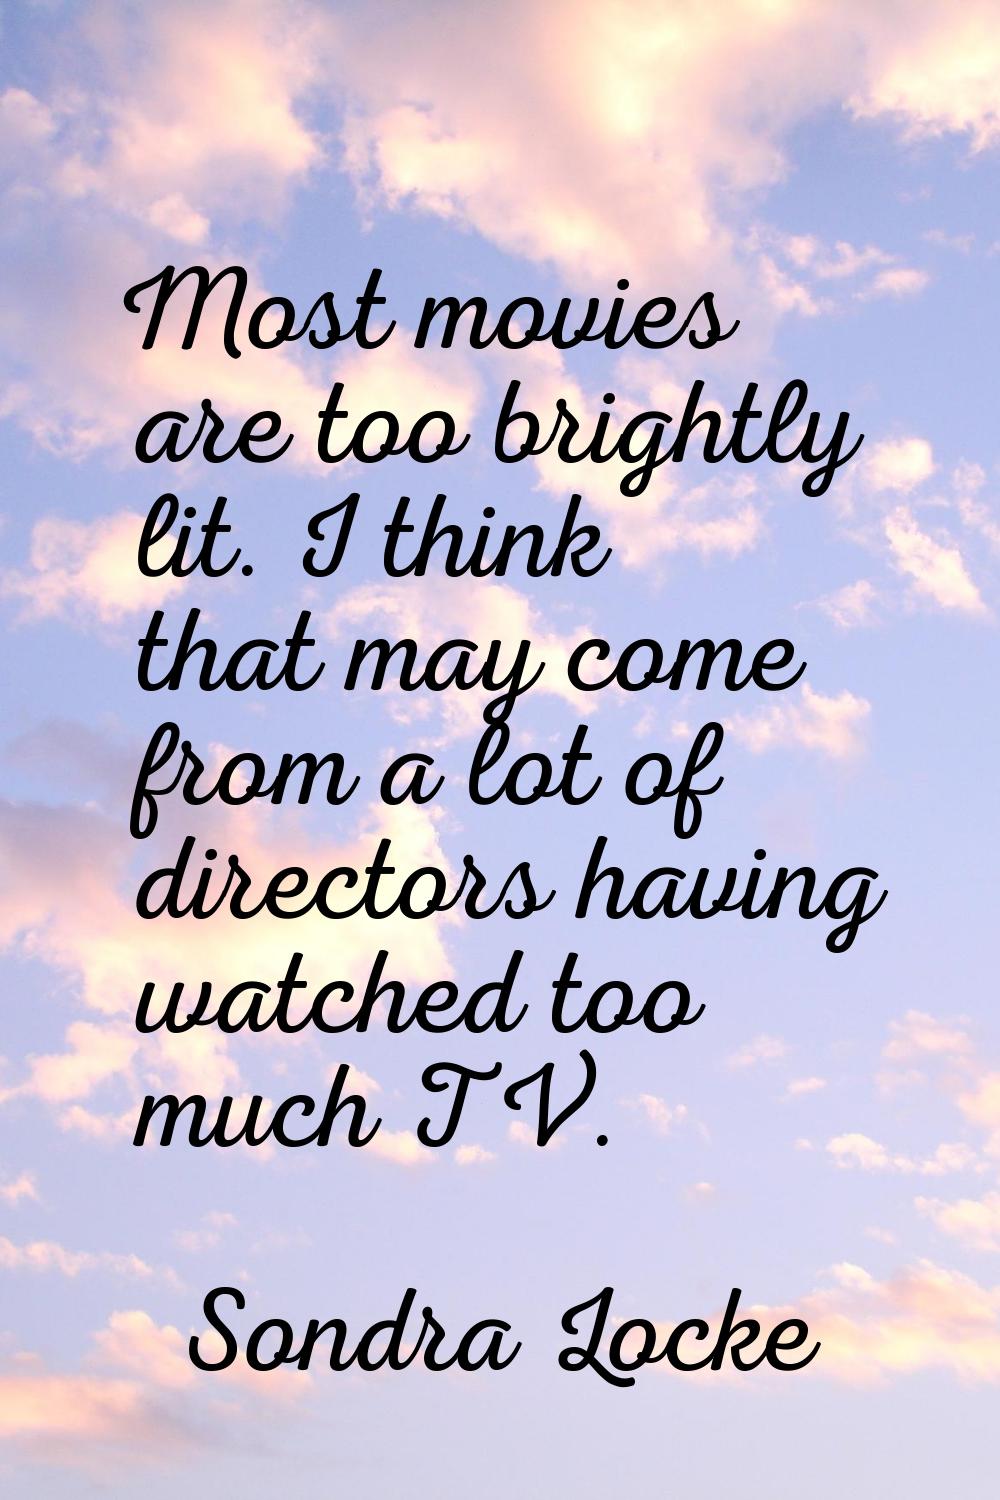 Most movies are too brightly lit. I think that may come from a lot of directors having watched too 